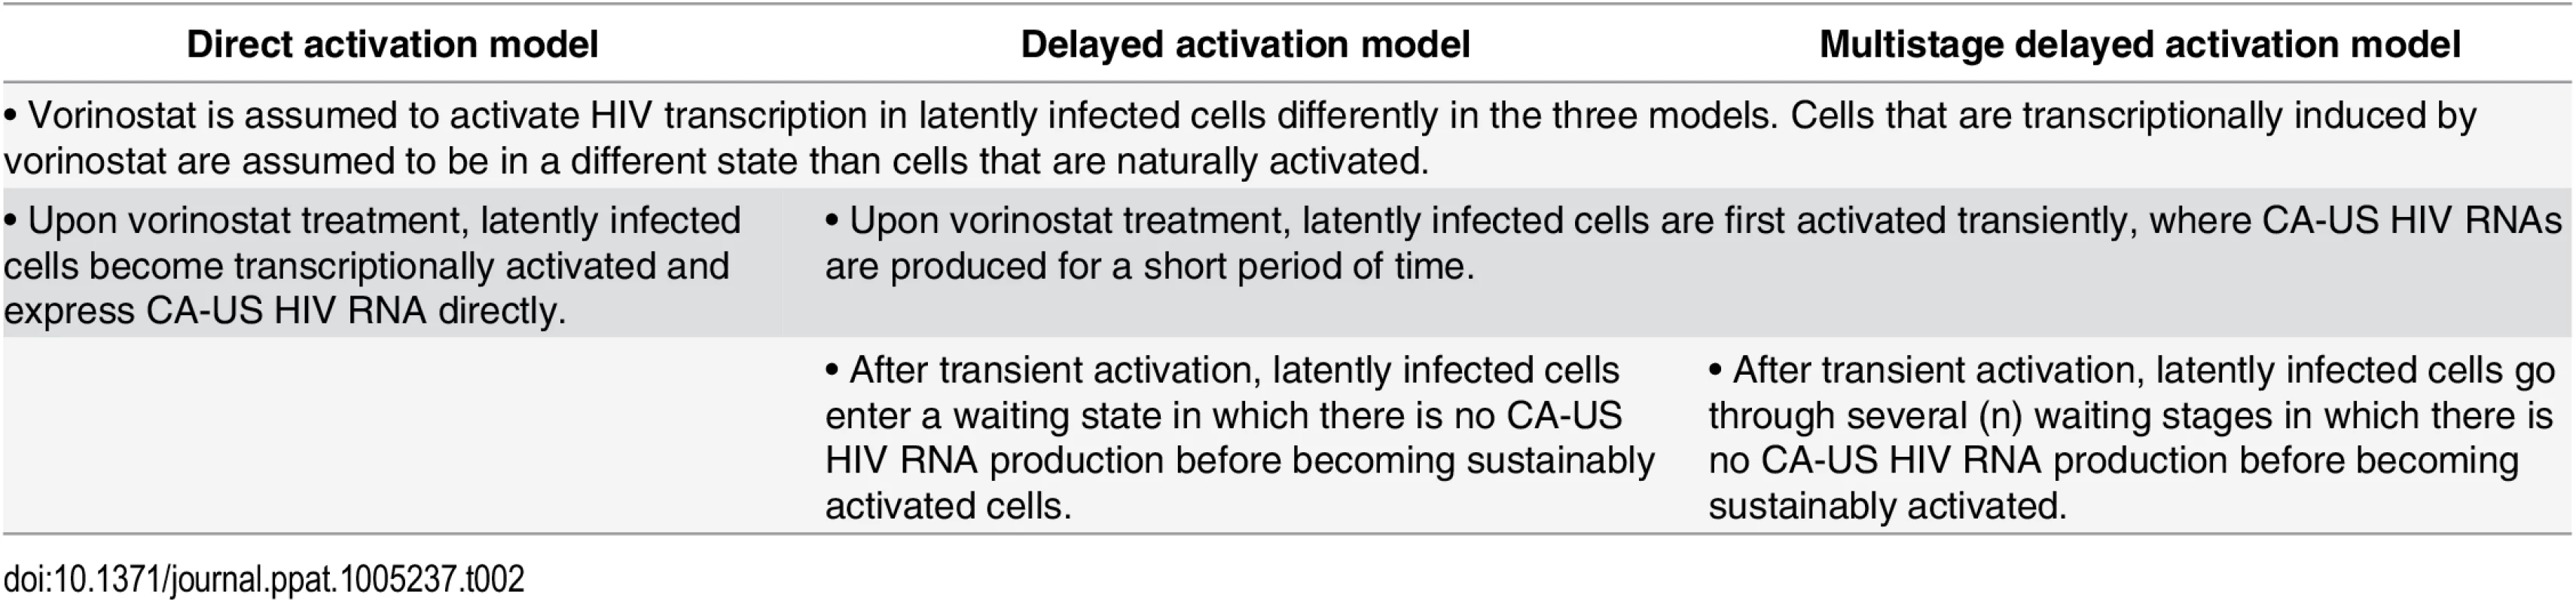 Comparison of assumptions made in the direct activation, the delayed activation, and the multistage delayed activation model.